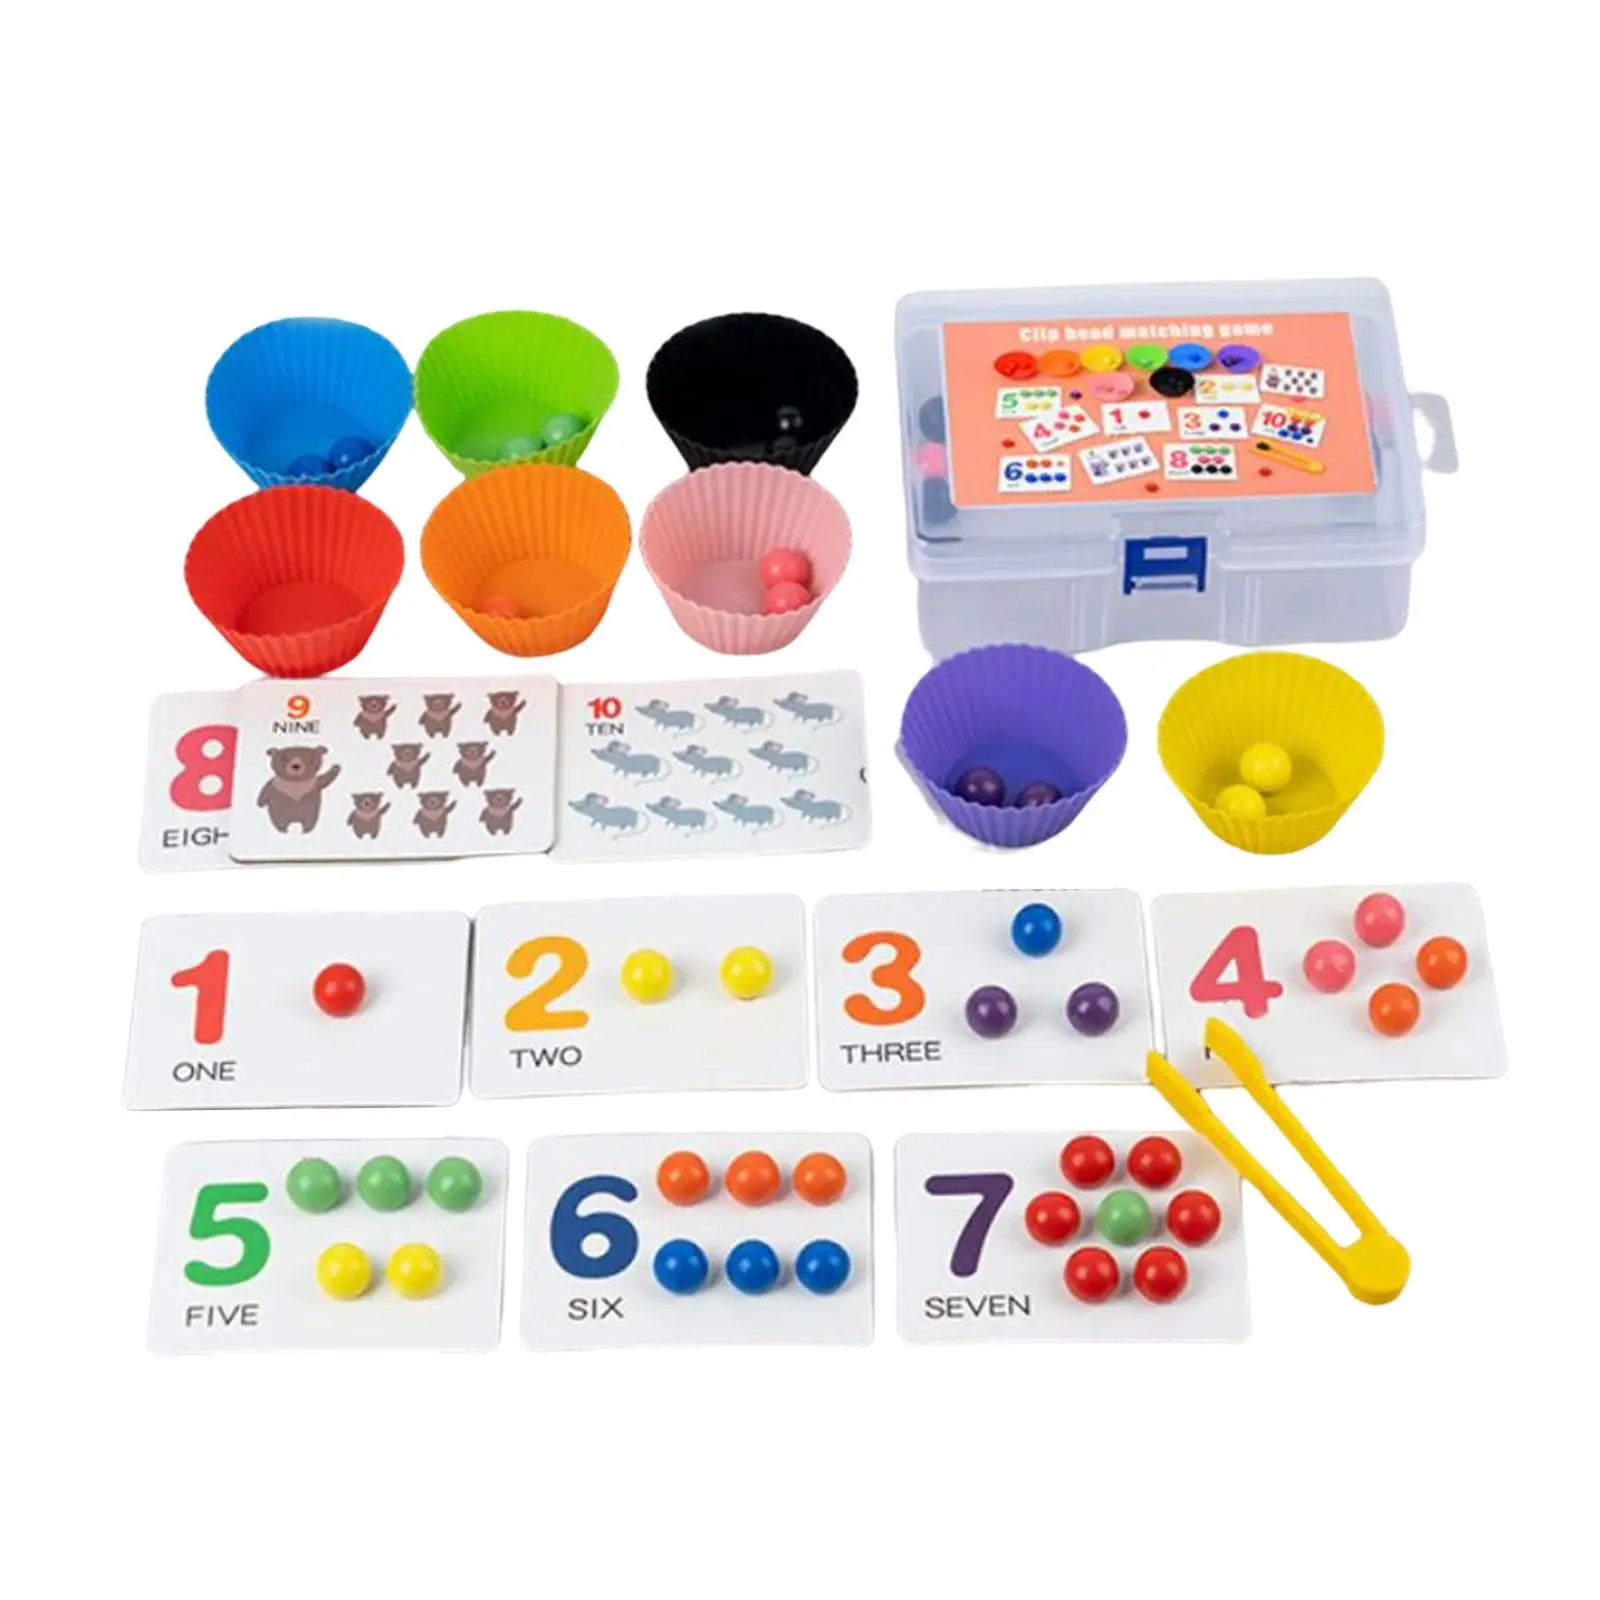 Wooden Peg Board Game Fine Motor Skill Wooden Rainbow Balls in Cups for Kids